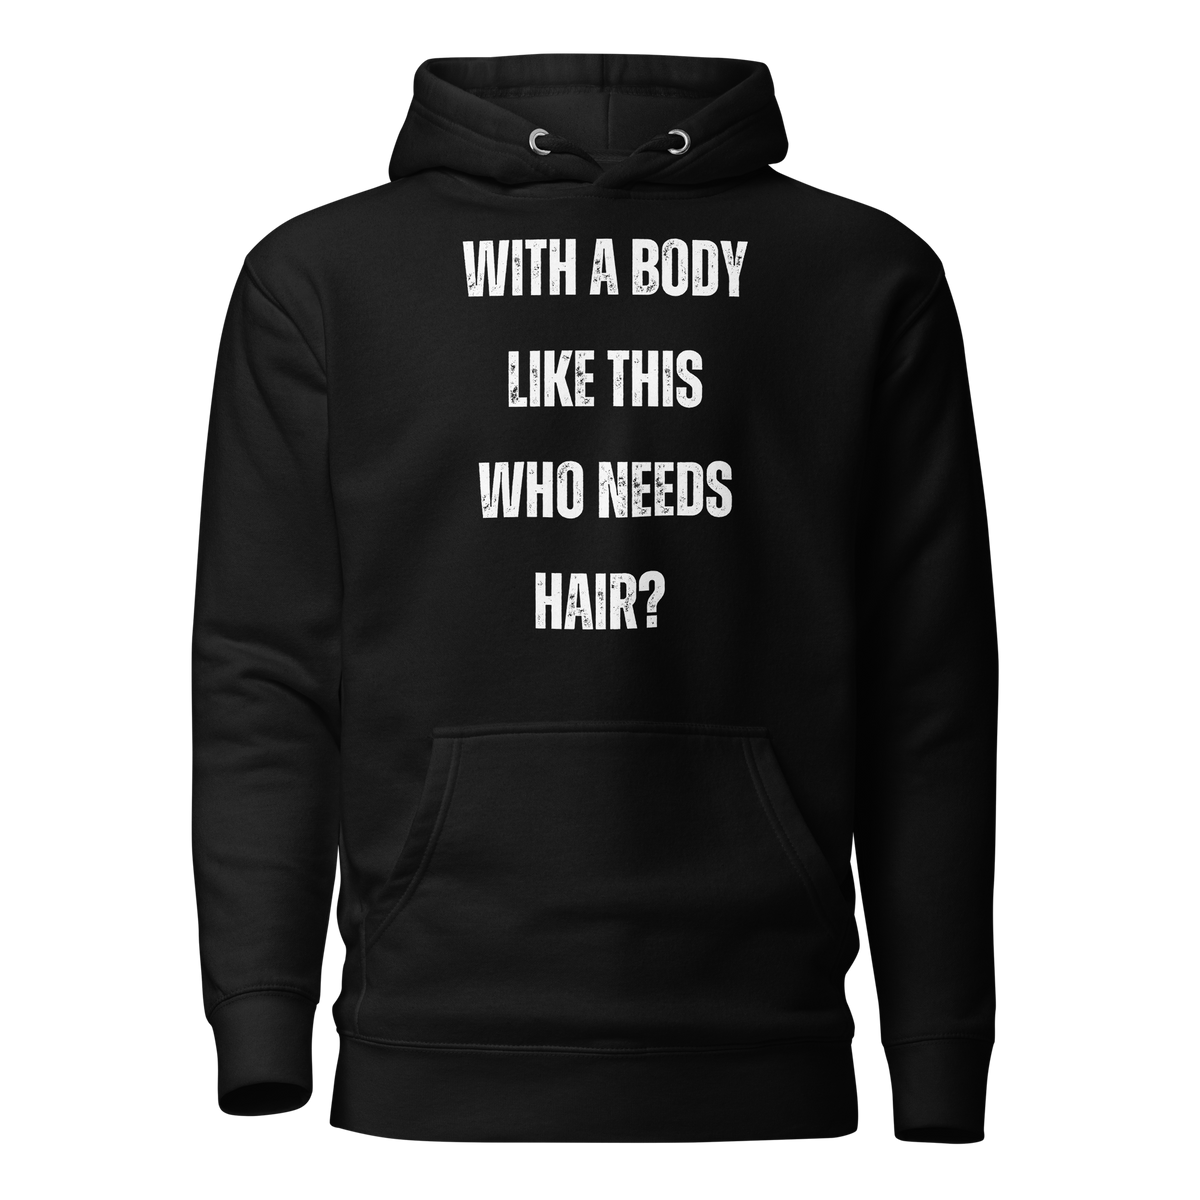 With a Body Like This Who Needs Hair, Funny Shirt for Men, Fathers Day Gift, Husband Gift, Humor Tshirt, Dad Gift, Mens Shirt, Sarcastic Tee, hoodie